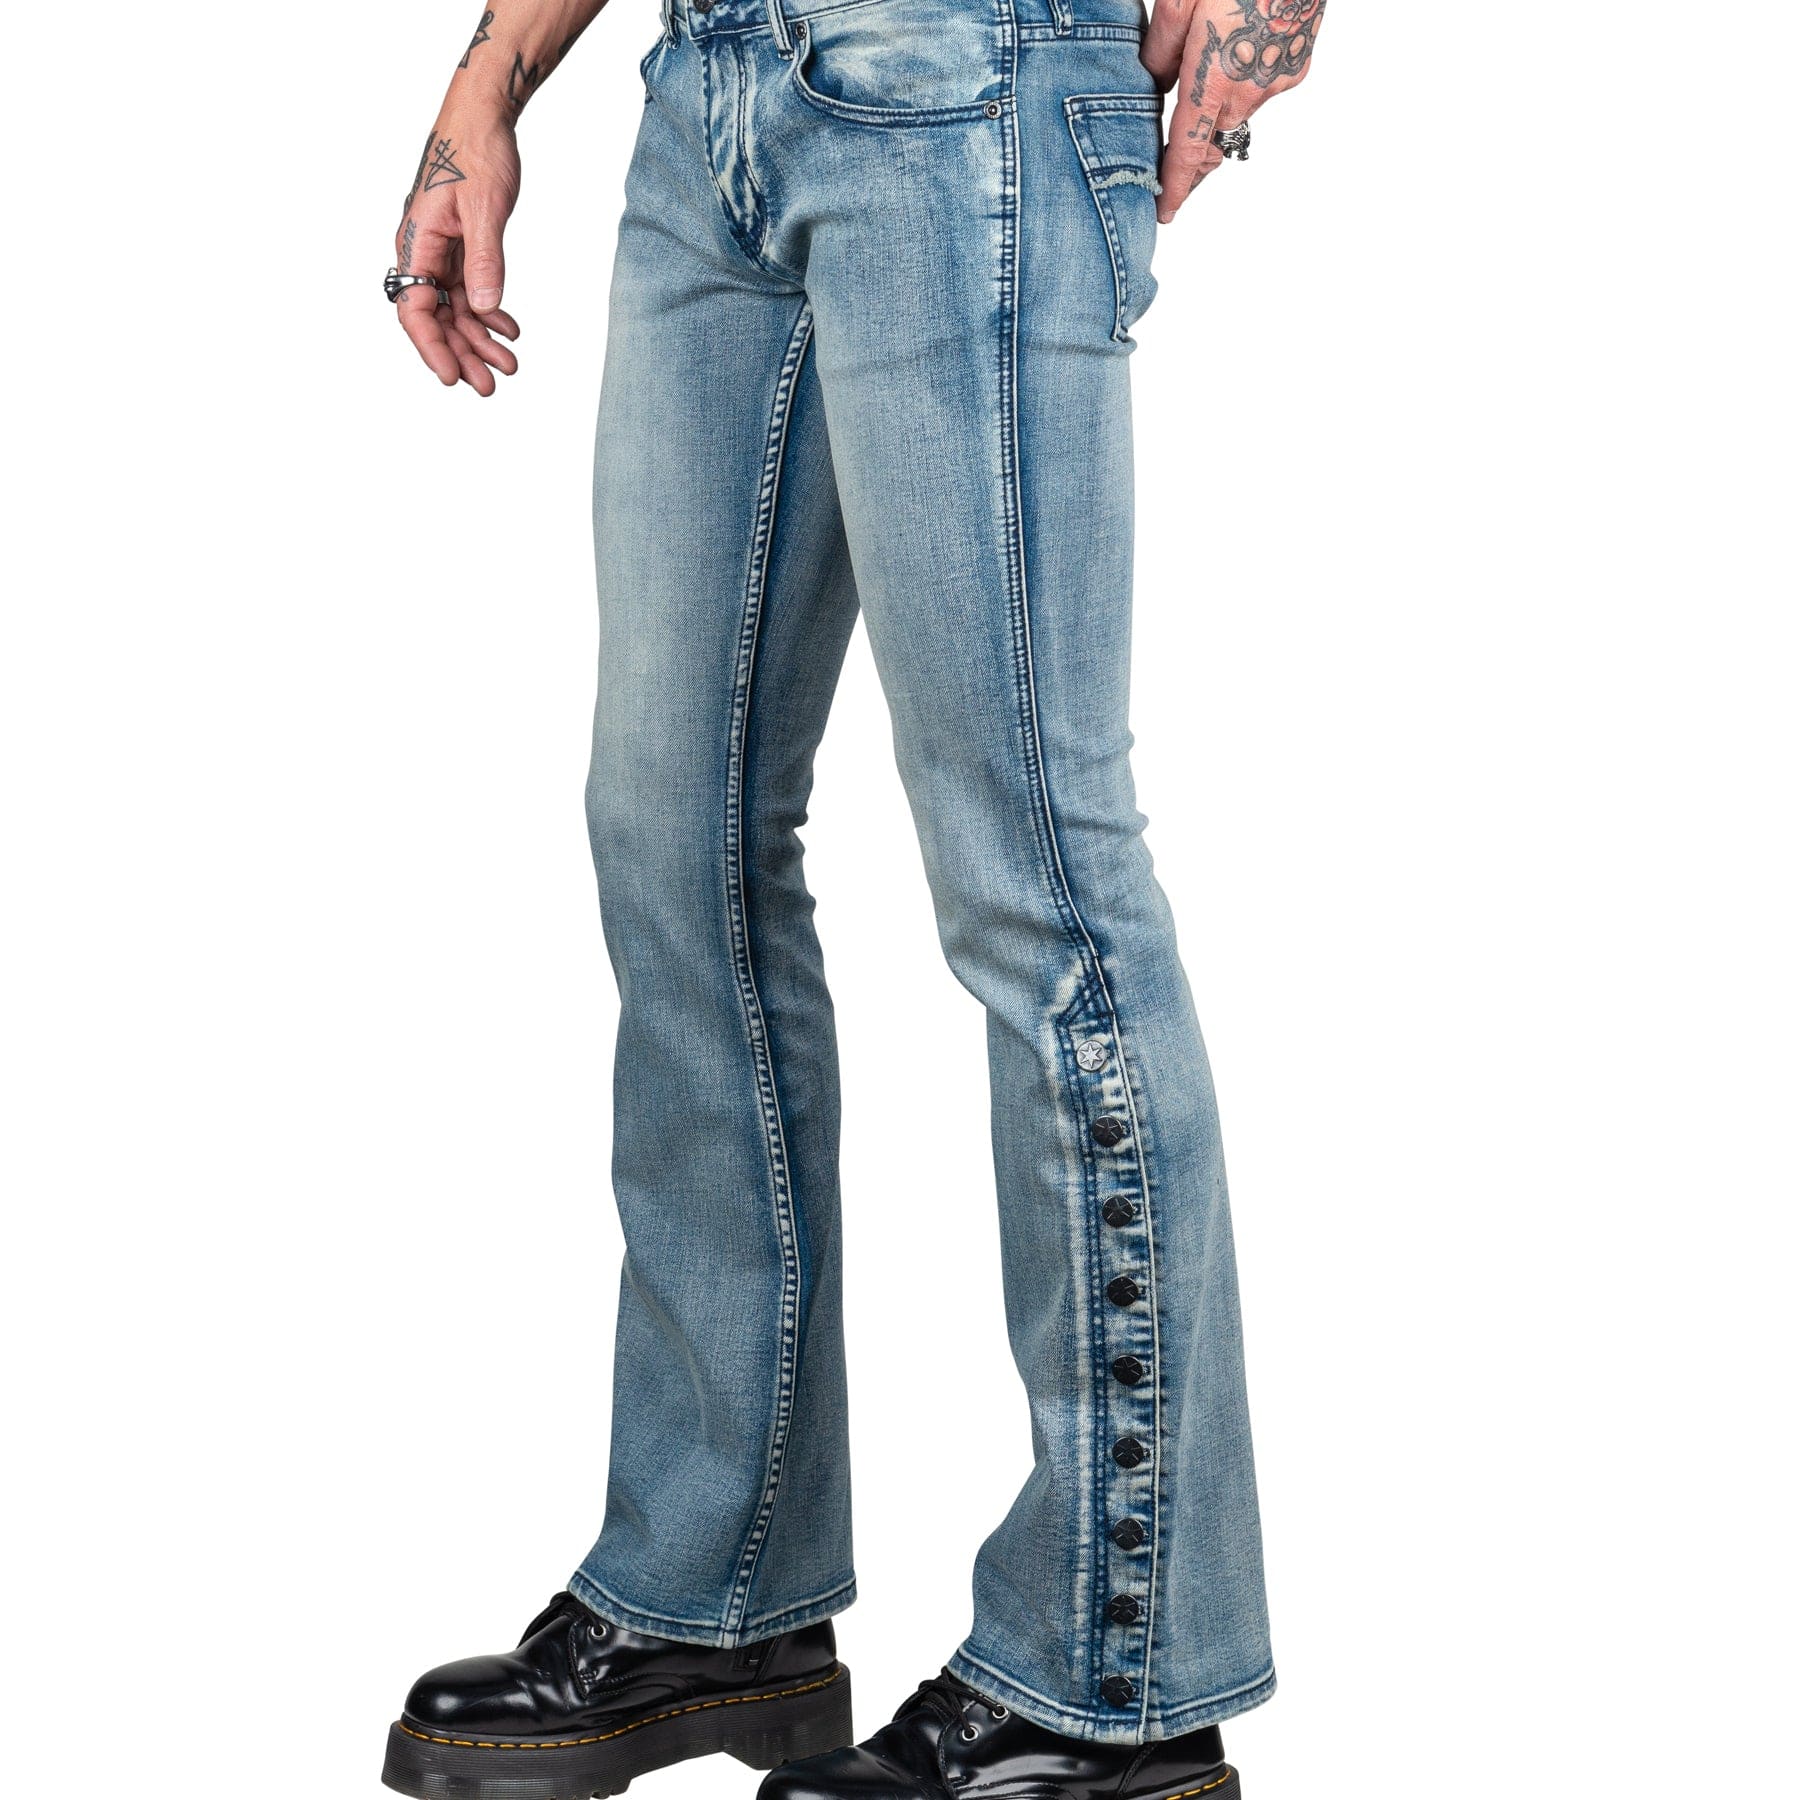 Wornstar Clothing Mens Jeans Hellraiser Denim Pants With Side Buttons - Classic Blue